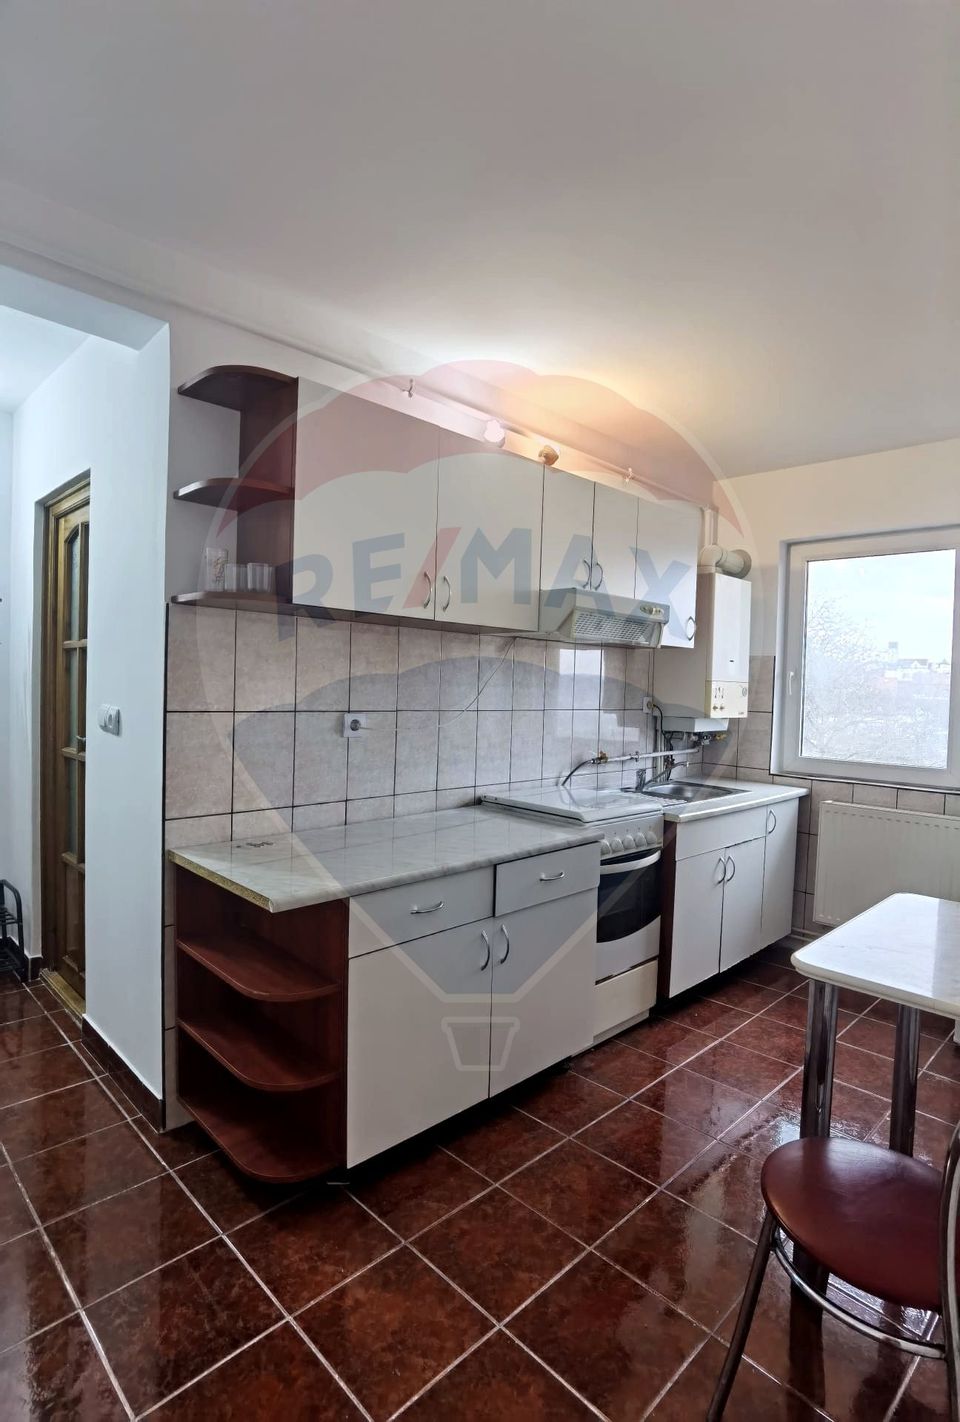 1 room Apartment for sale, Semicentral area